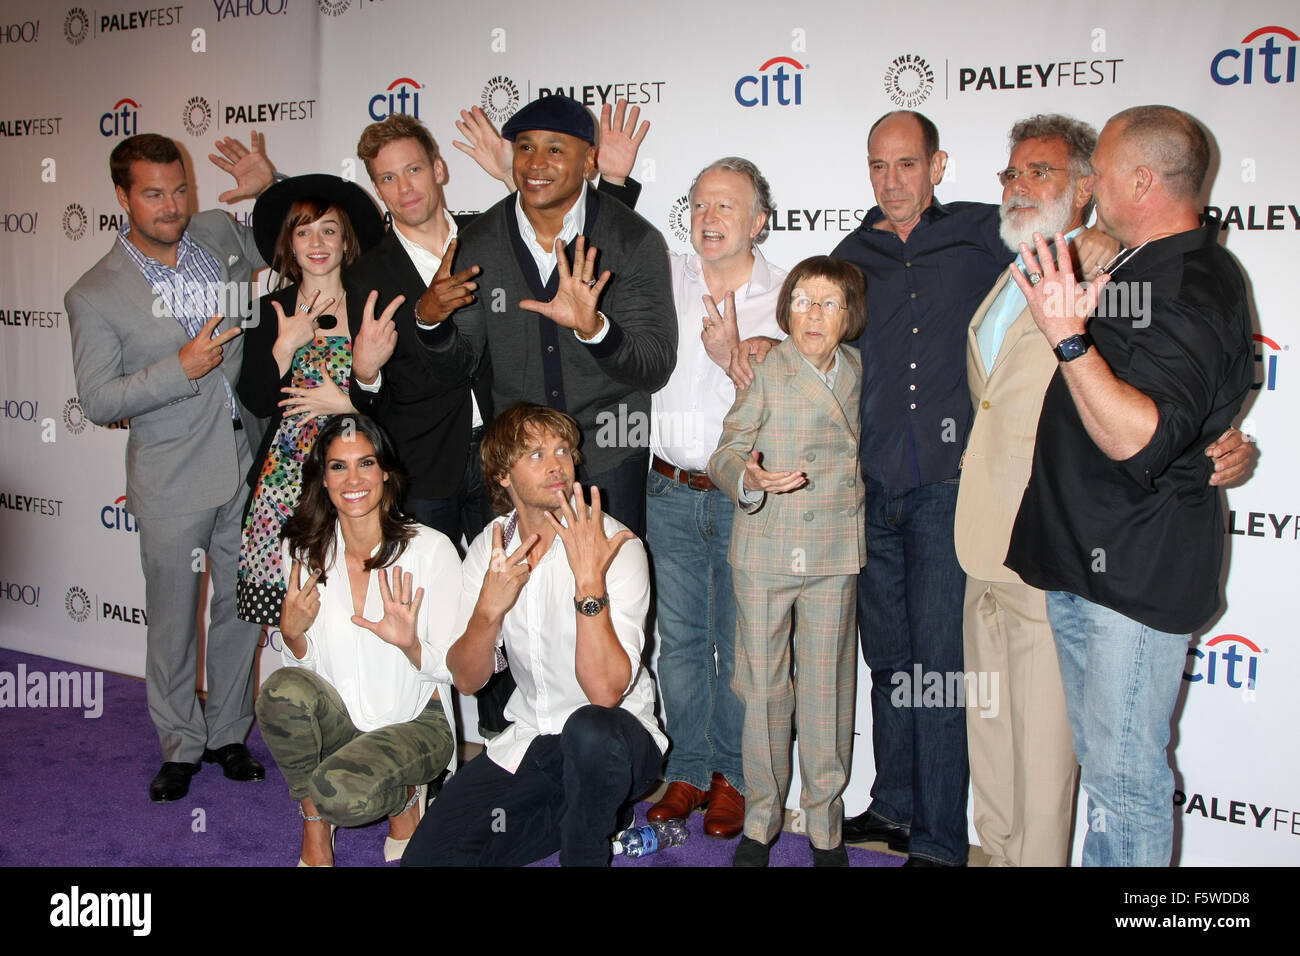 PaleyFest Special Event: 'NCIS: Los Angeles' Fall Premiere - Arrivals  Featuring: NCIS LA Cast with Executive Producers Where: Beverly Hills, California, United States When: 11 Sep 2015 Stock Photo